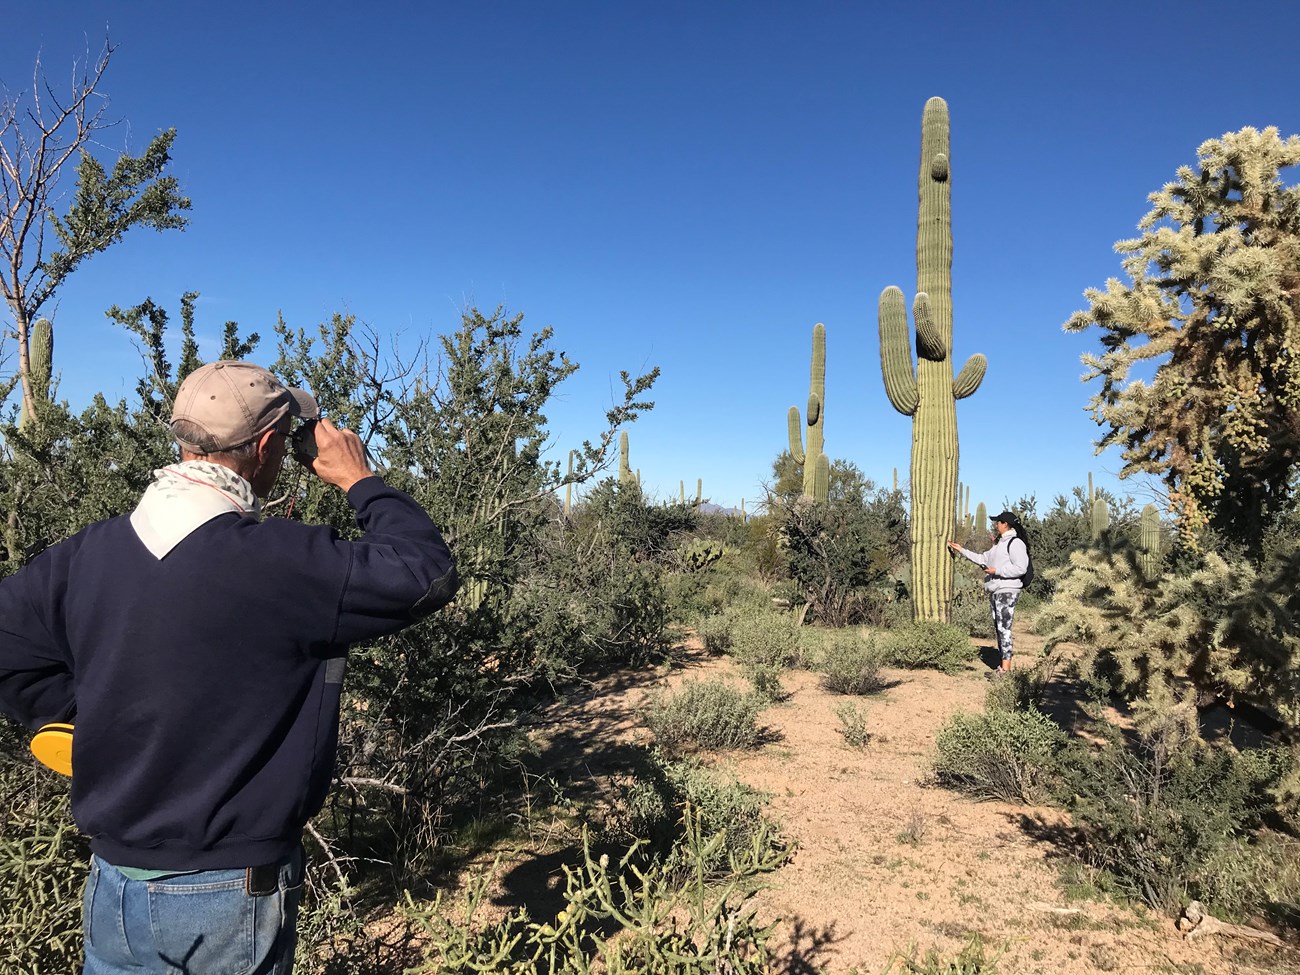 A volunteer using a clinometer to measure the height of a saguaro ahead of him.